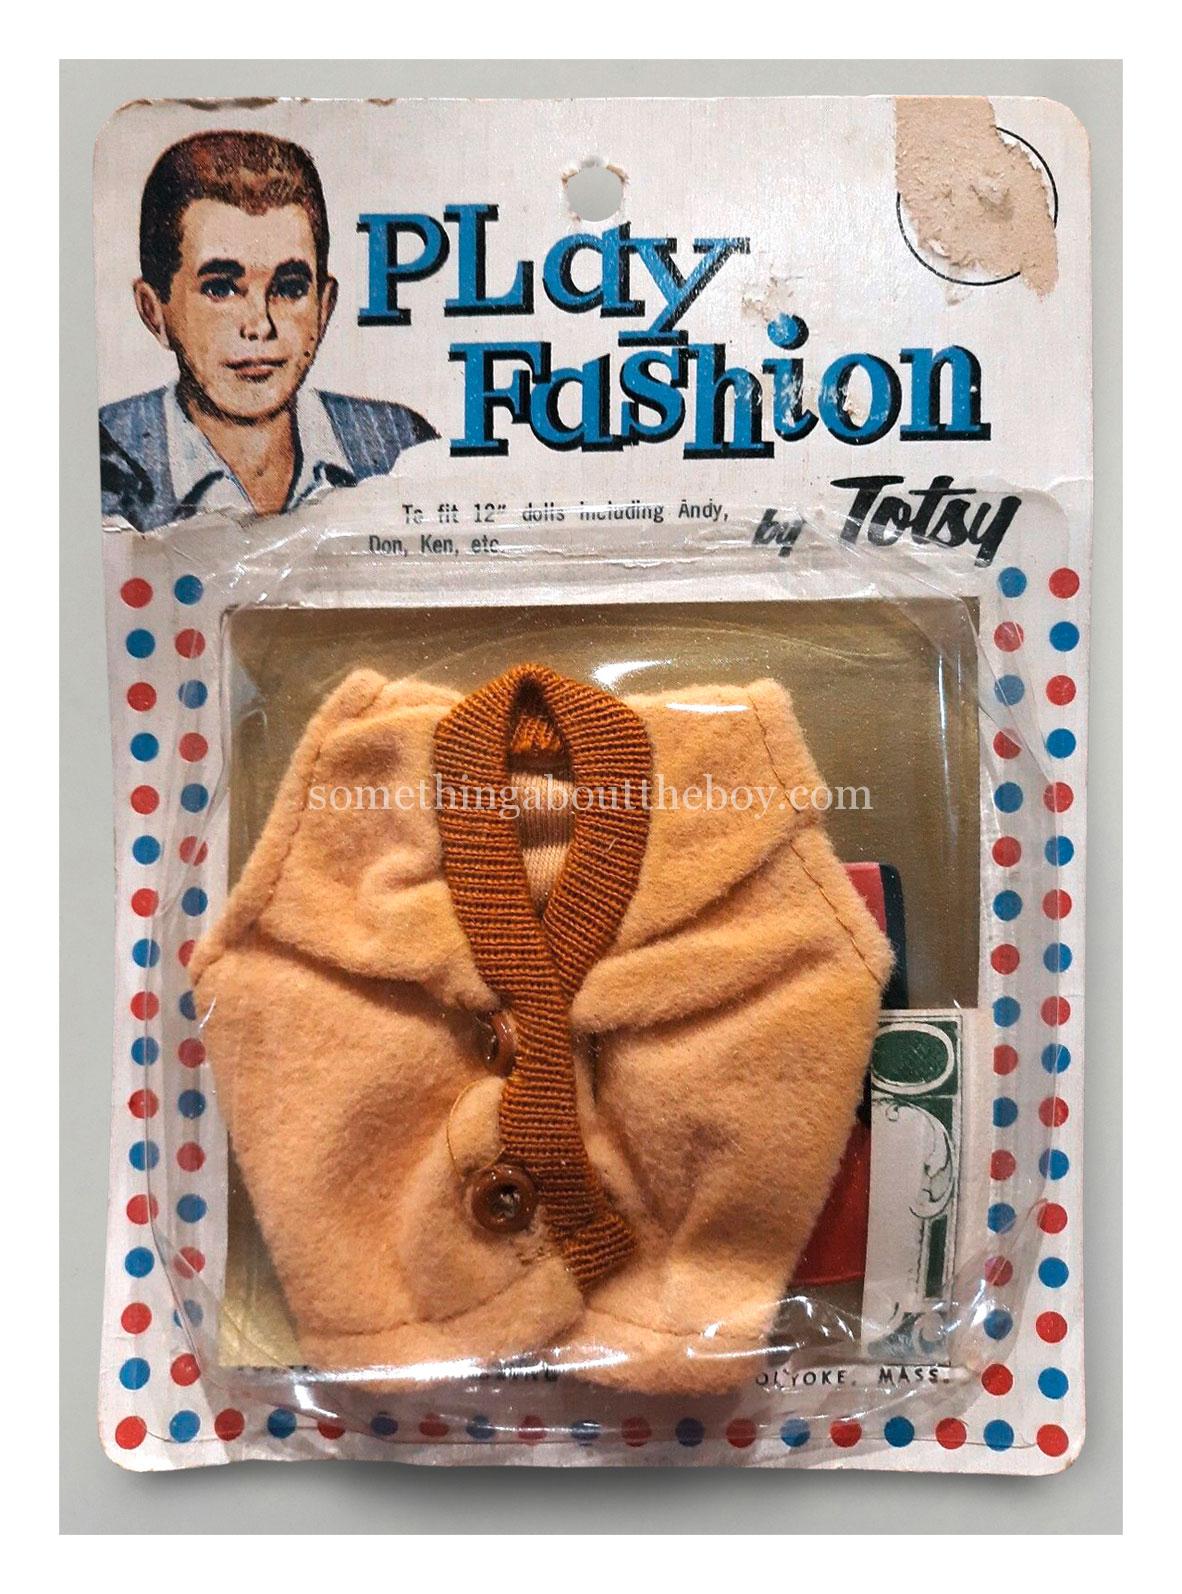 Play Fashion vest and wallet